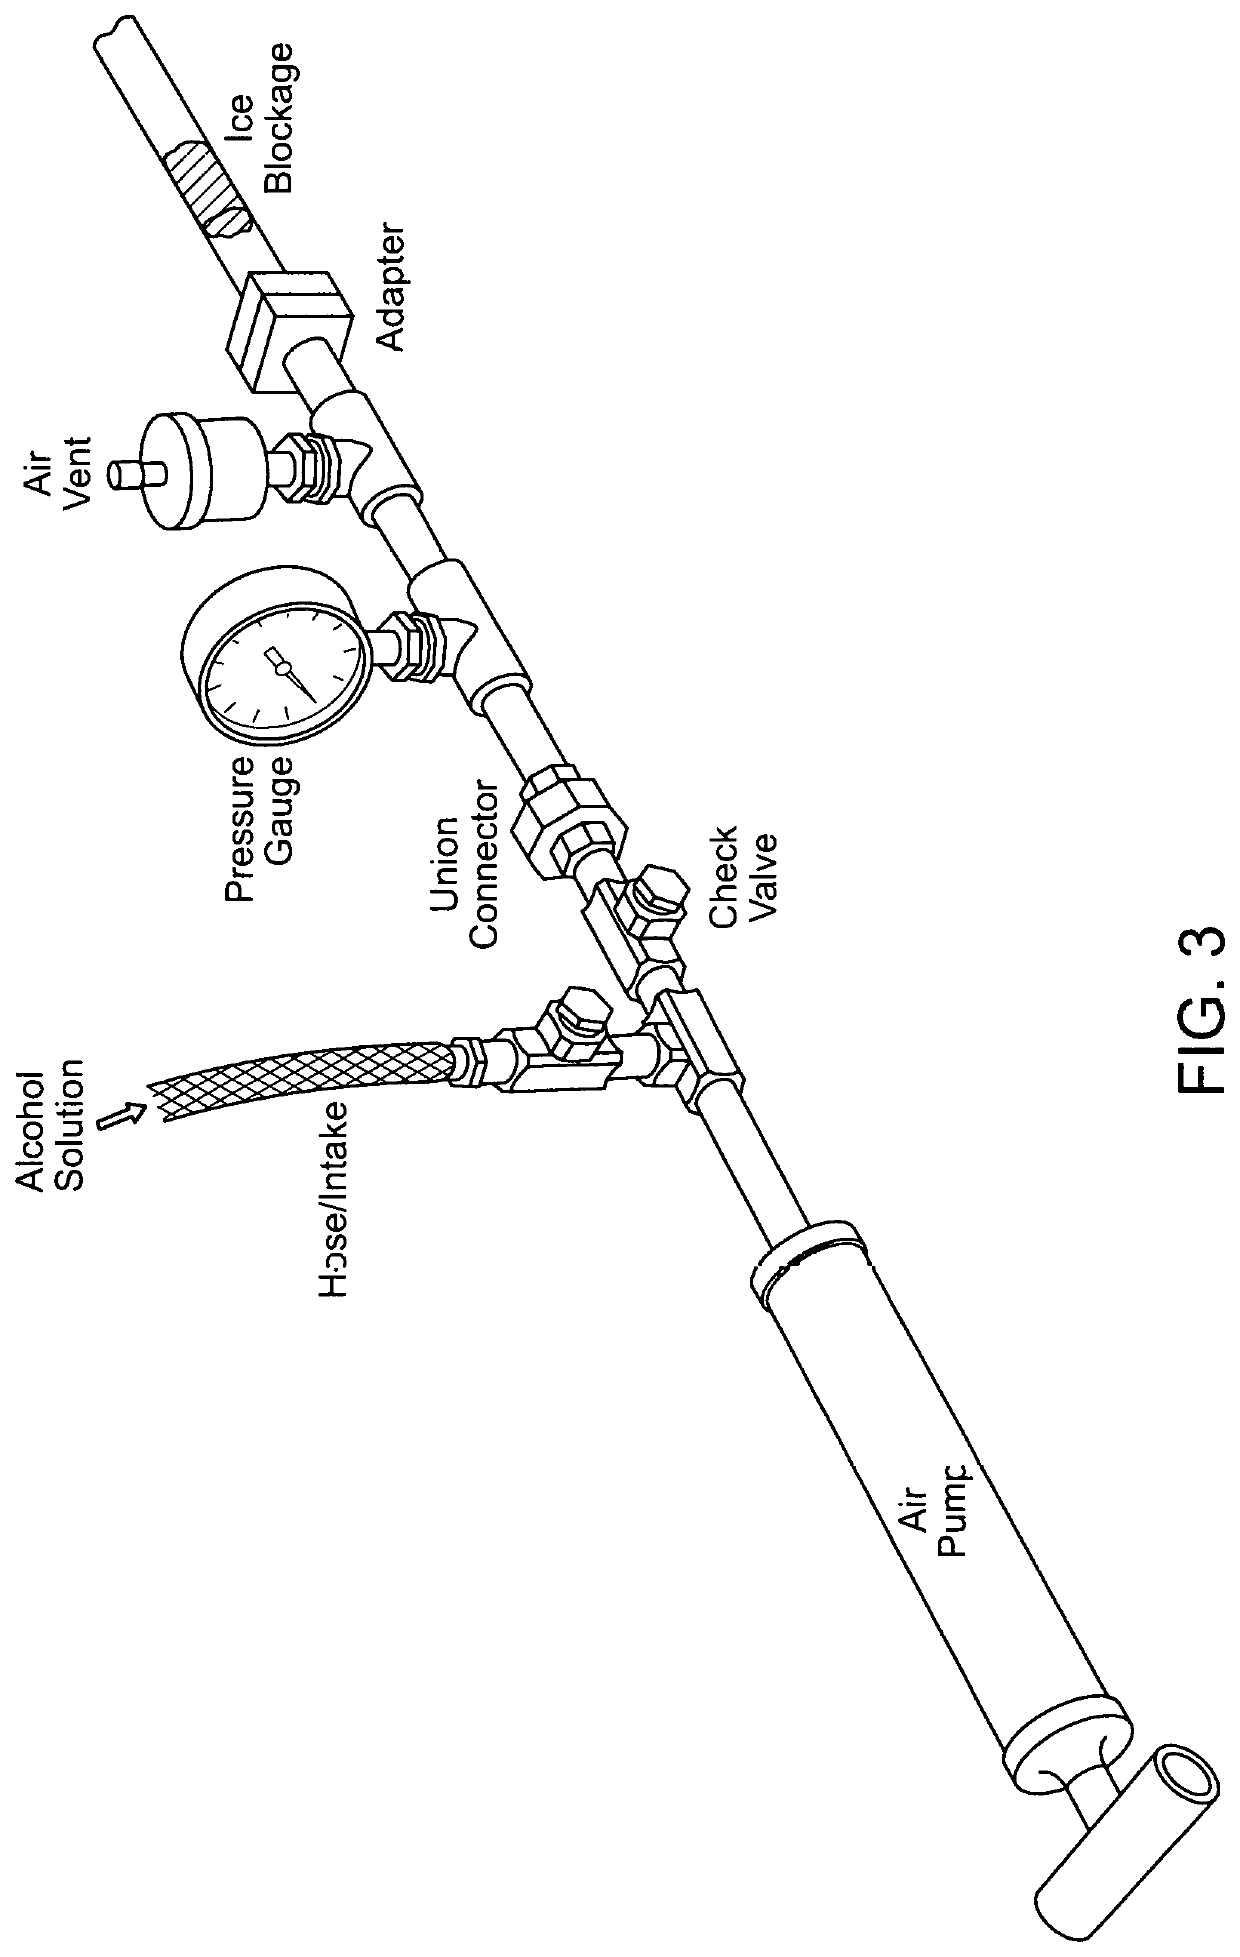 Device for thawing frozen pipes